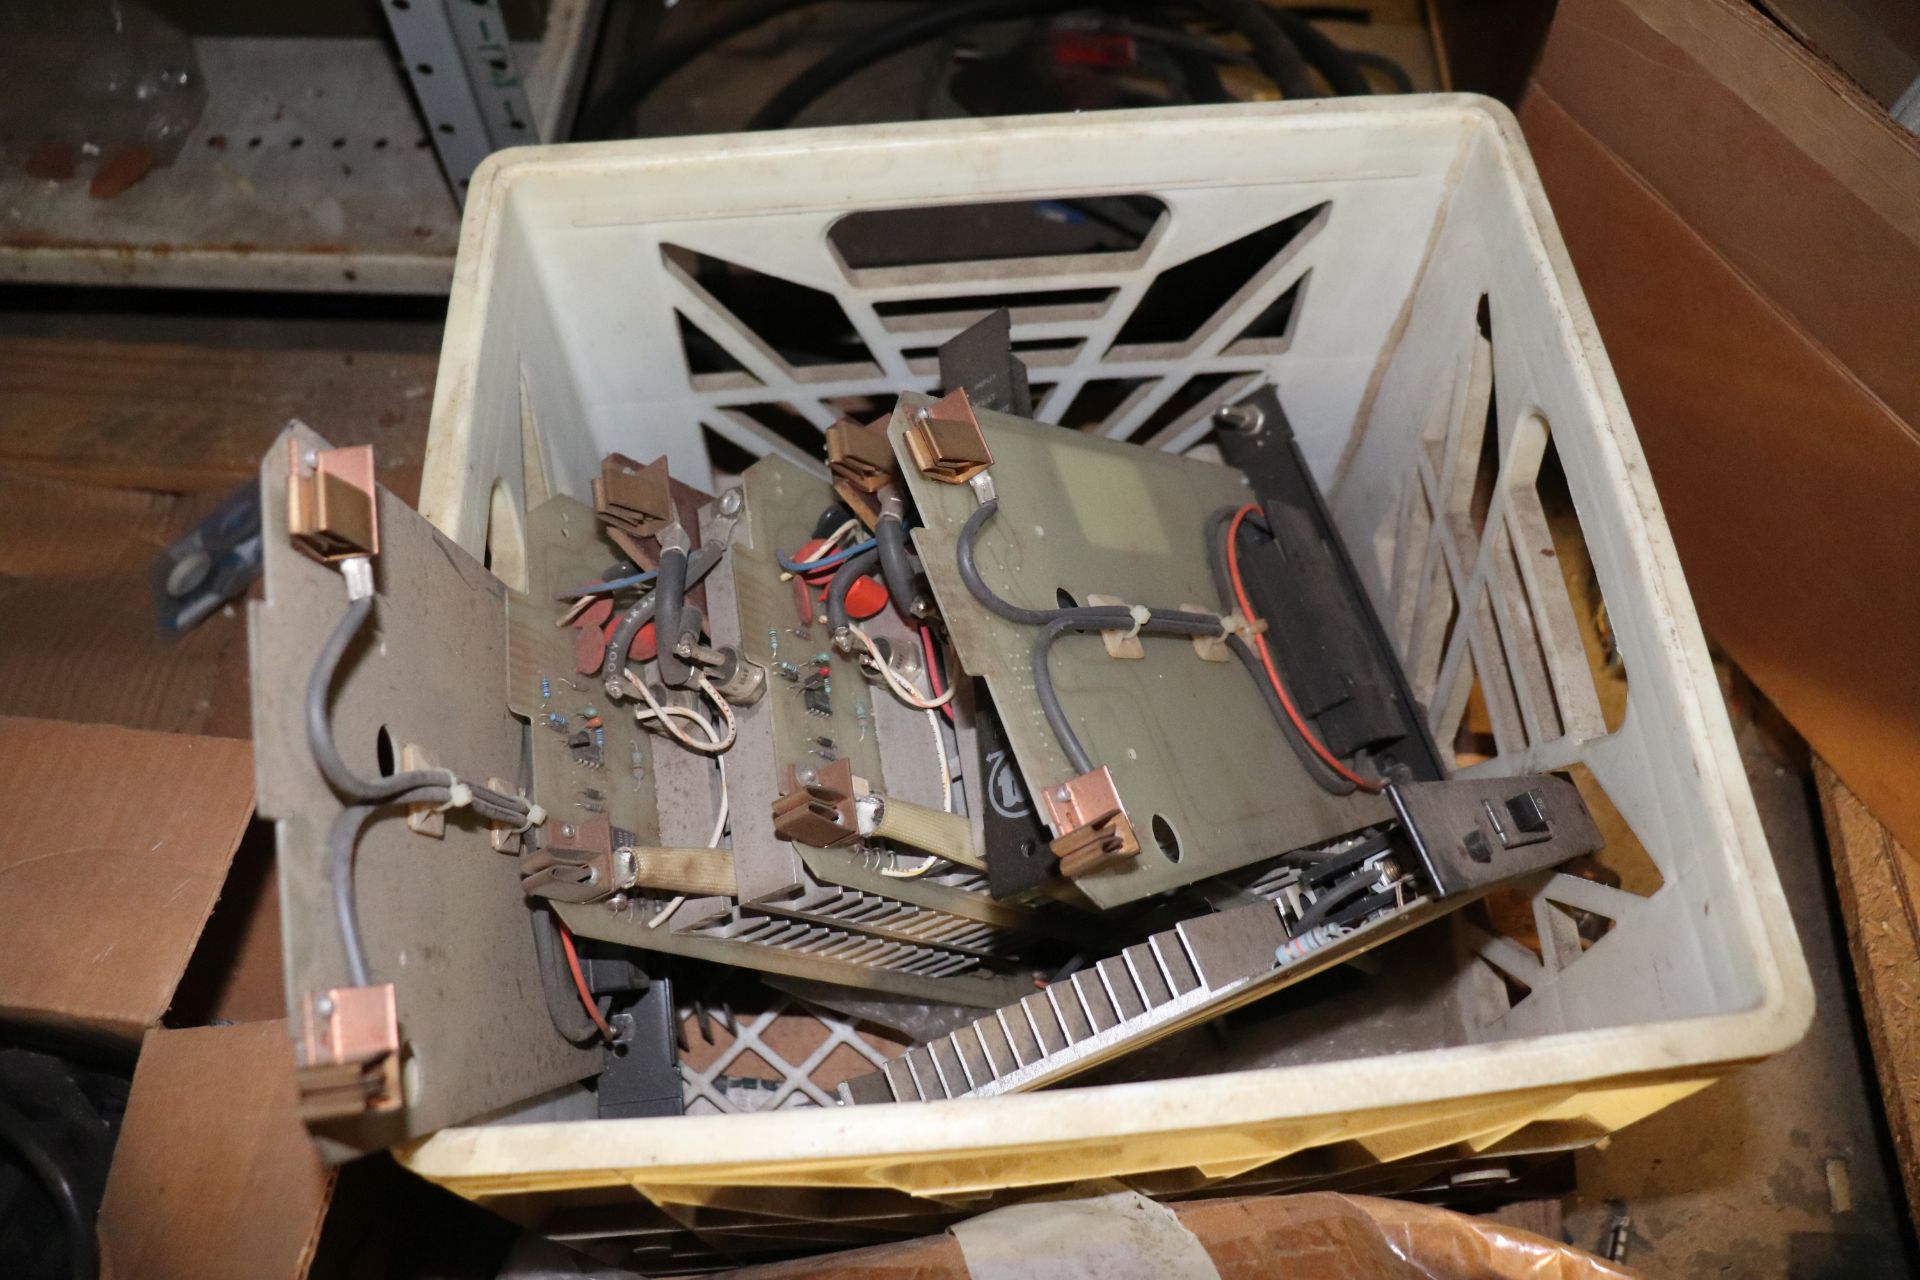 Pallet of small light bulbs, electrical components, circuit breakers, power bricks, and electric mot - Image 11 of 11